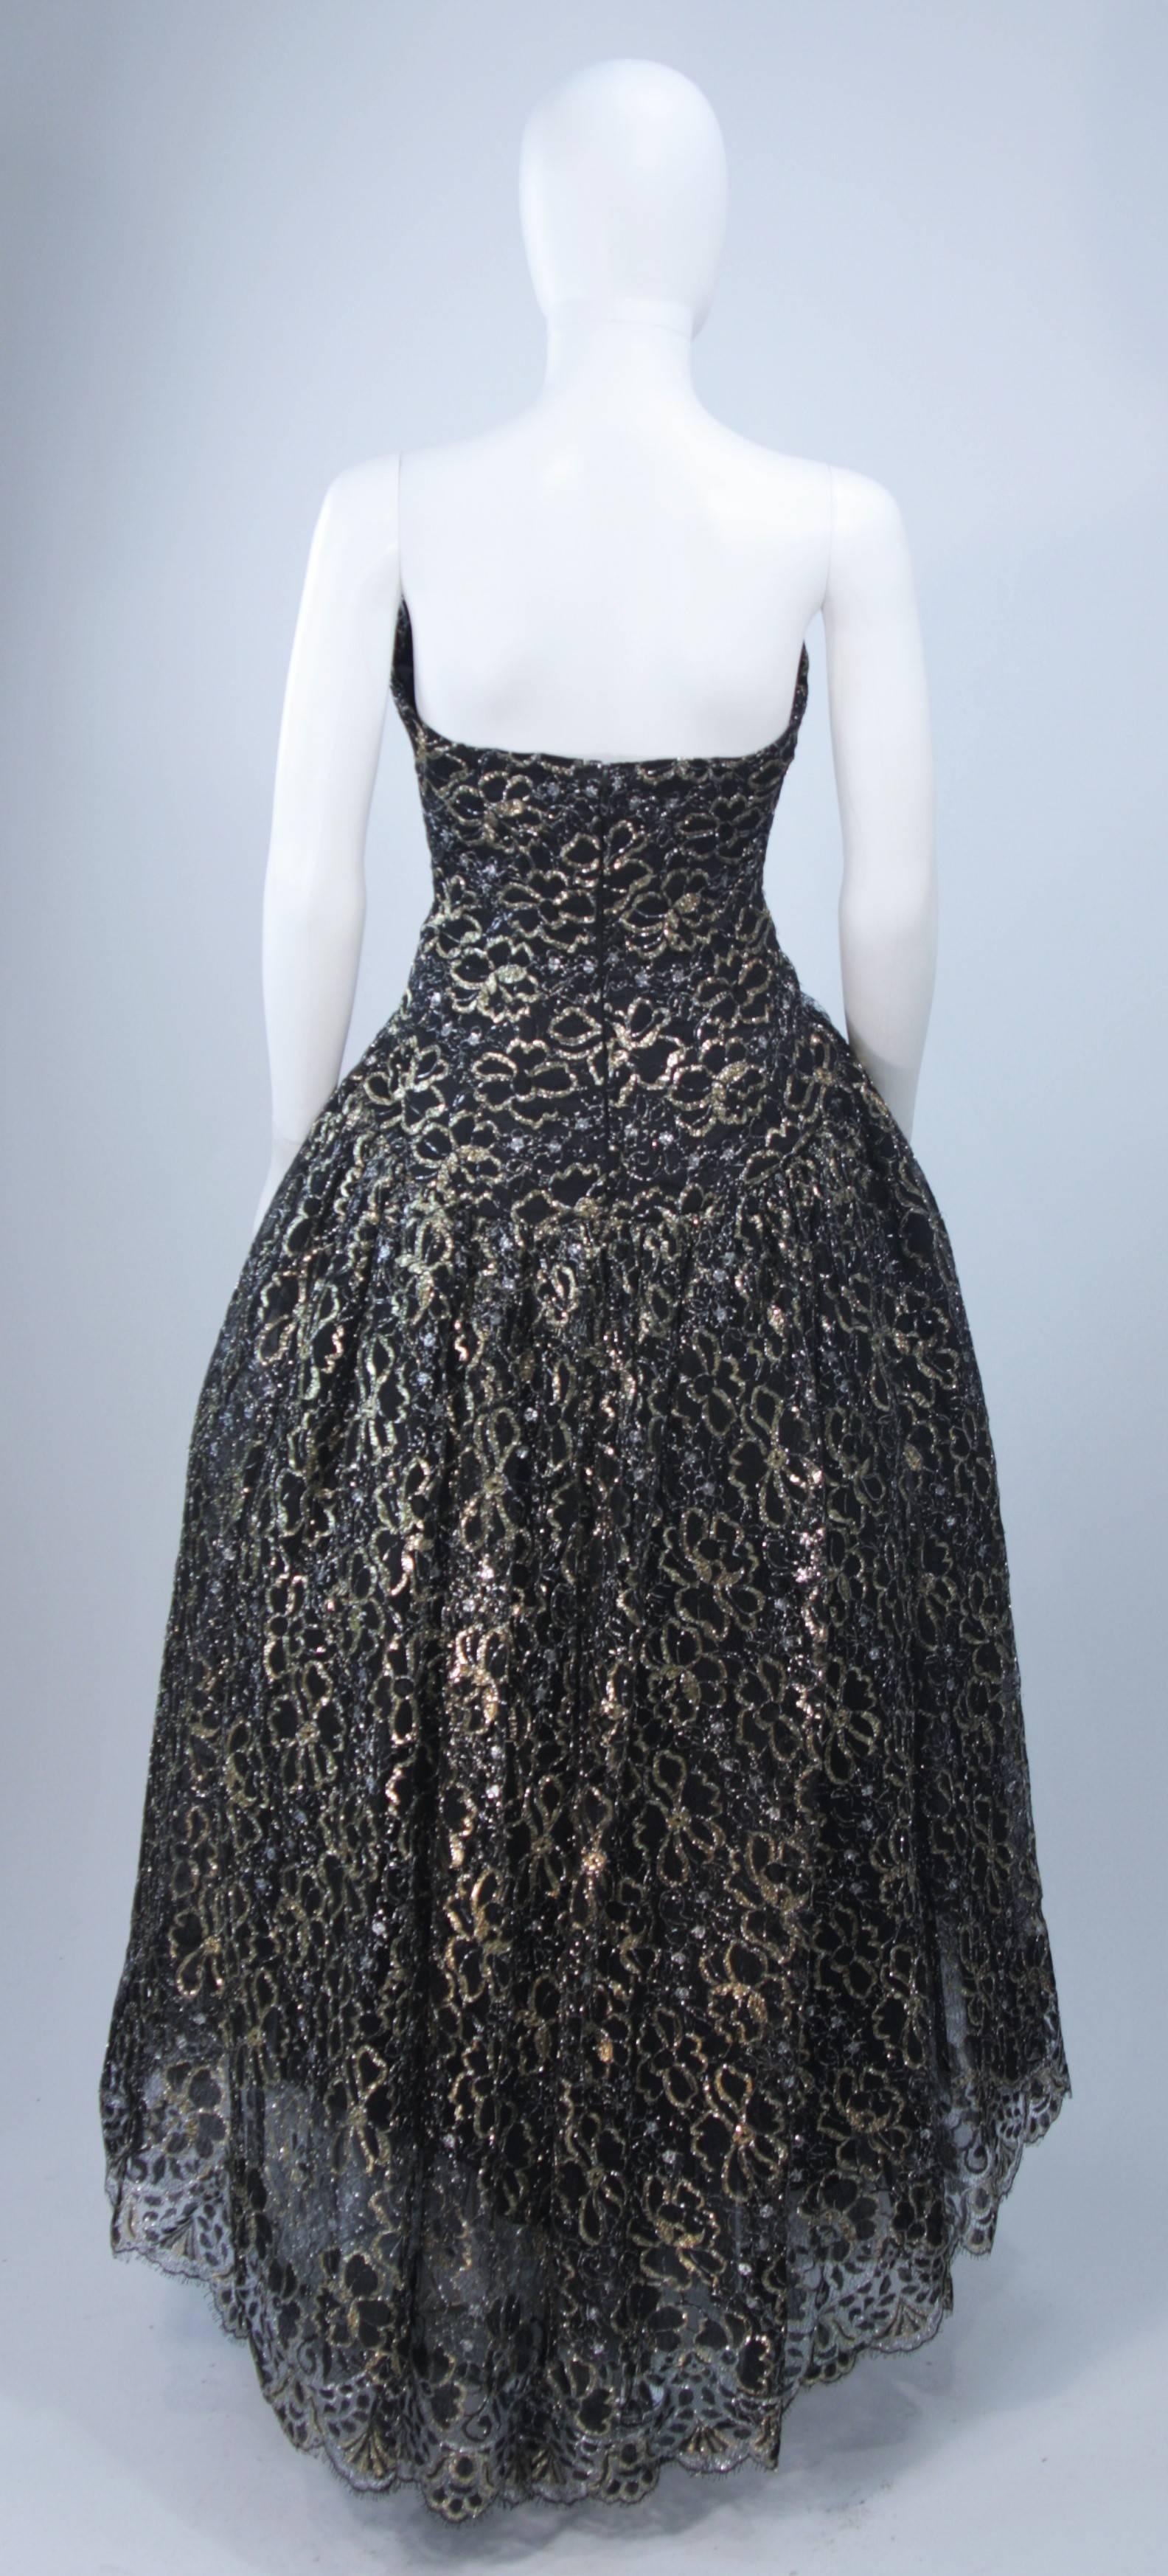 SCAASI Black and Gold Floral Metallic Lace Bustier Gown Size 4-6 1